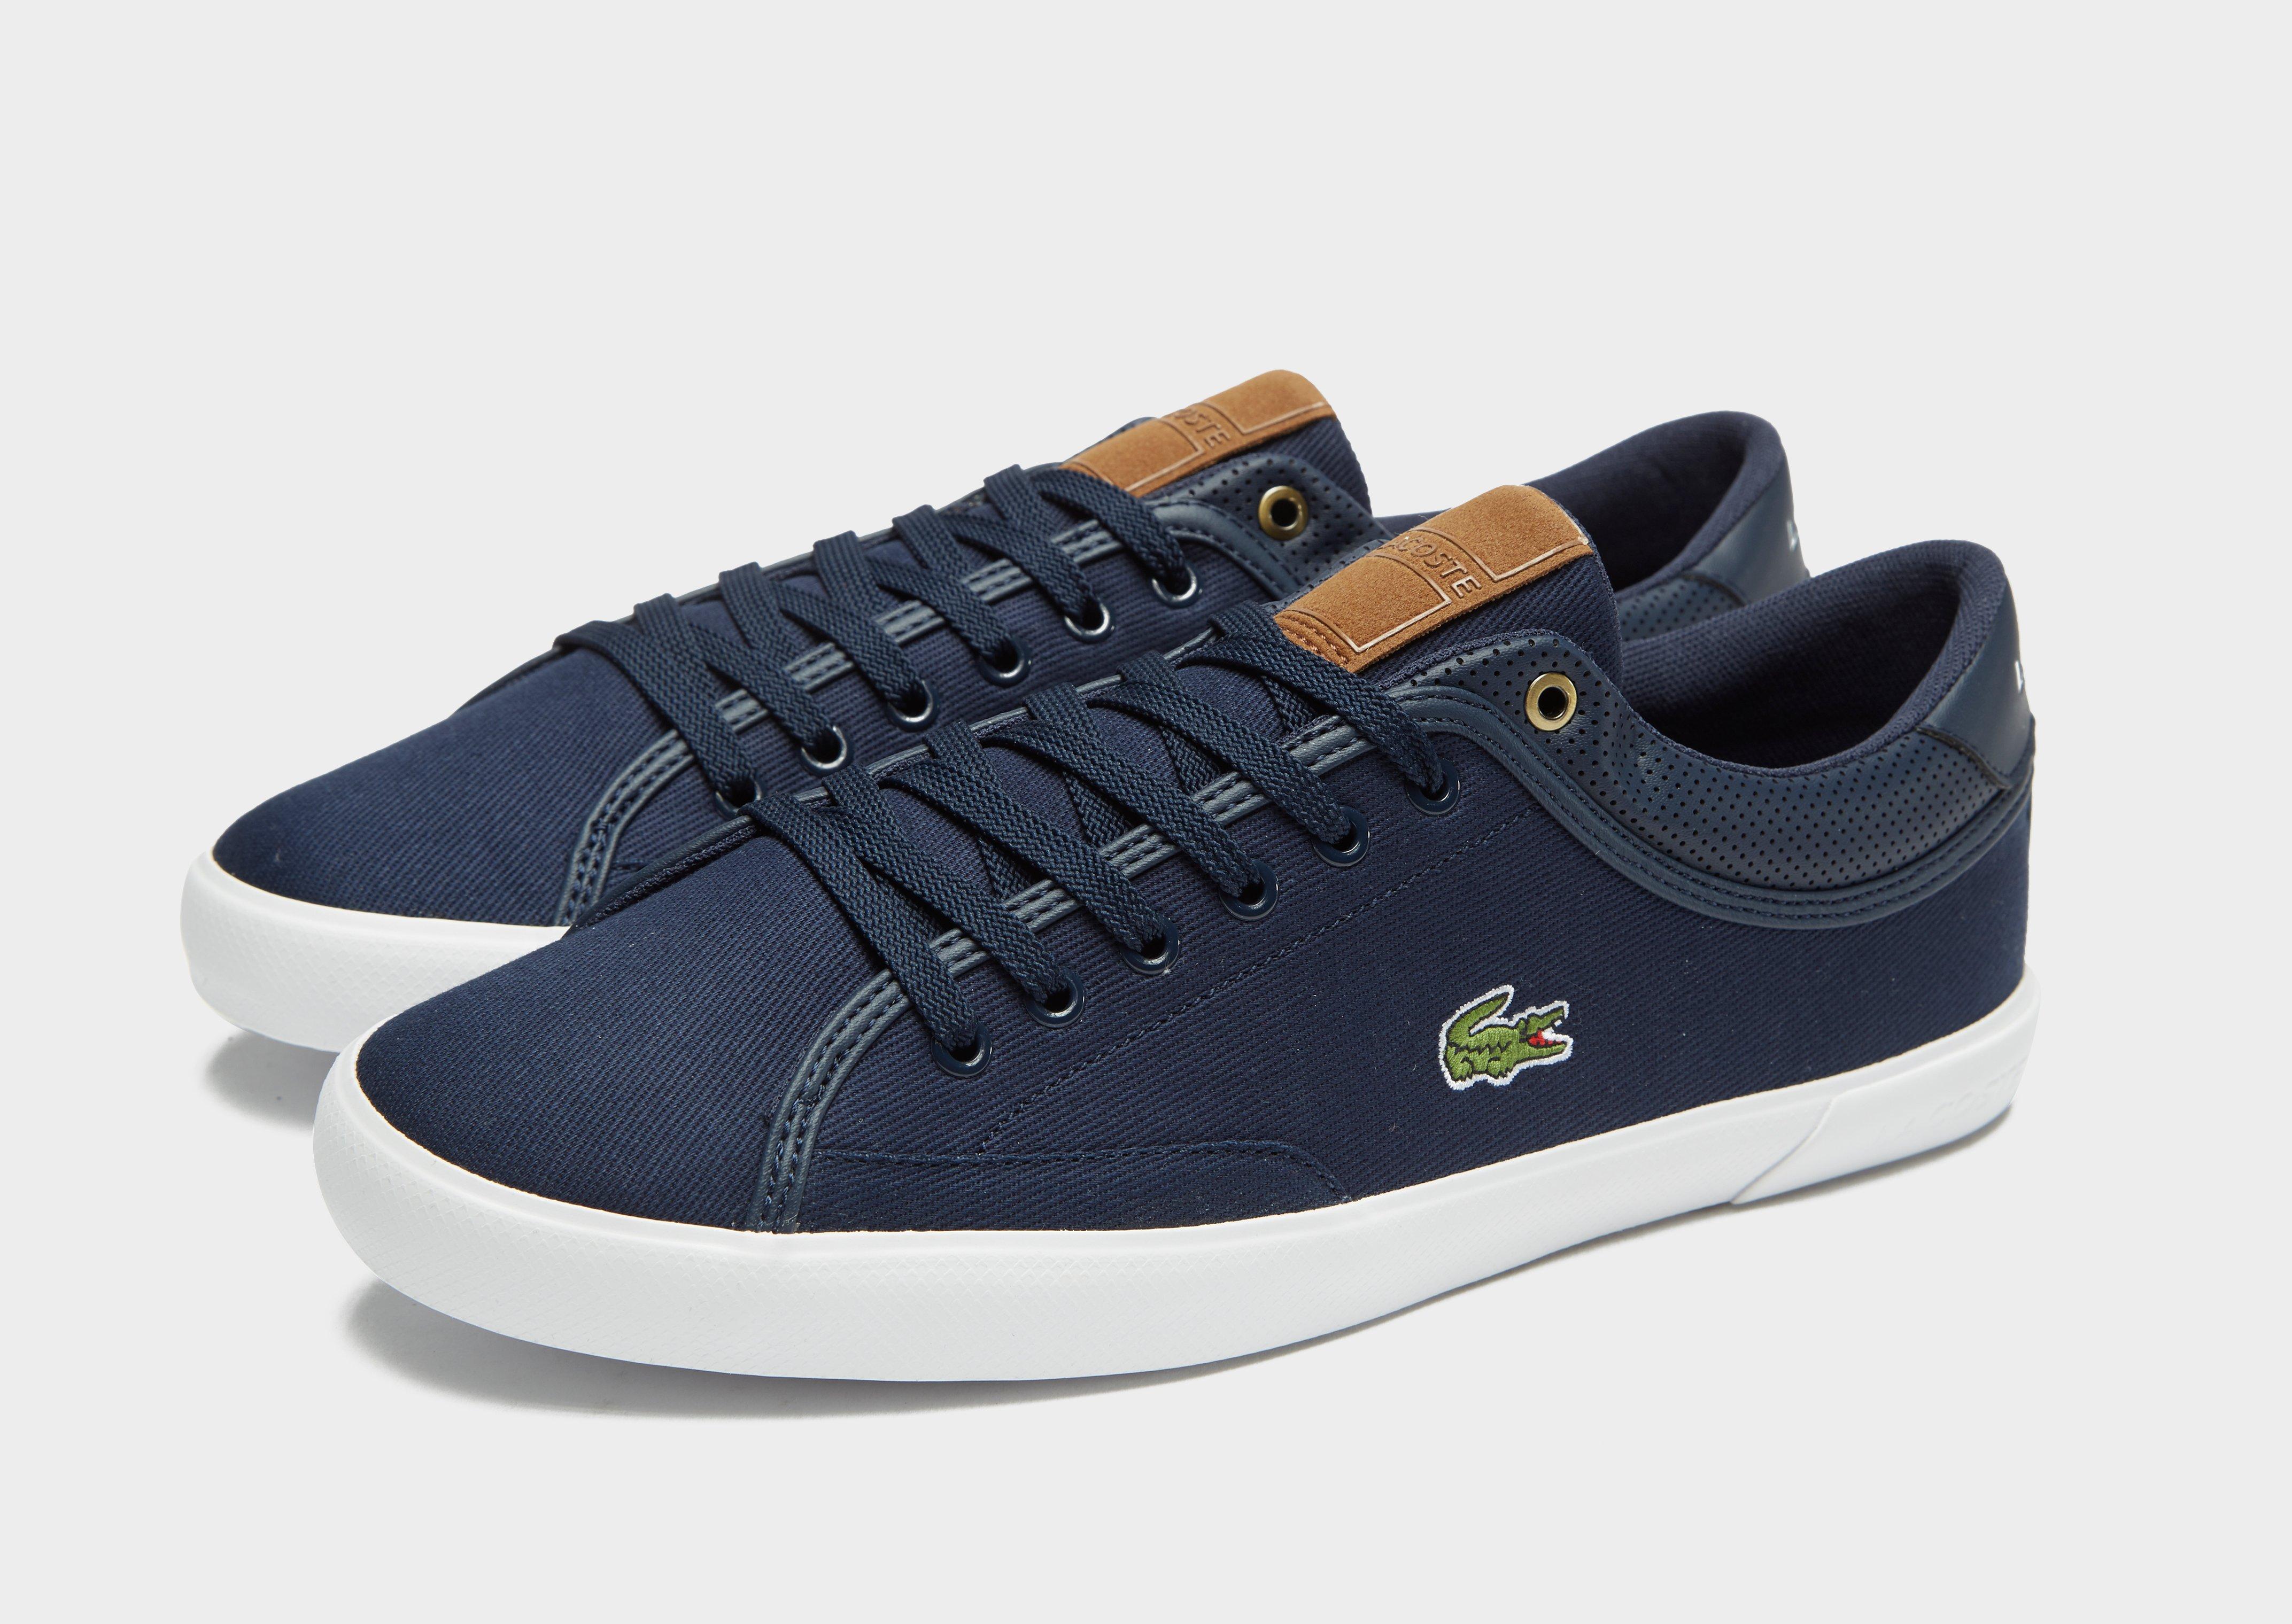 lacoste angha blue